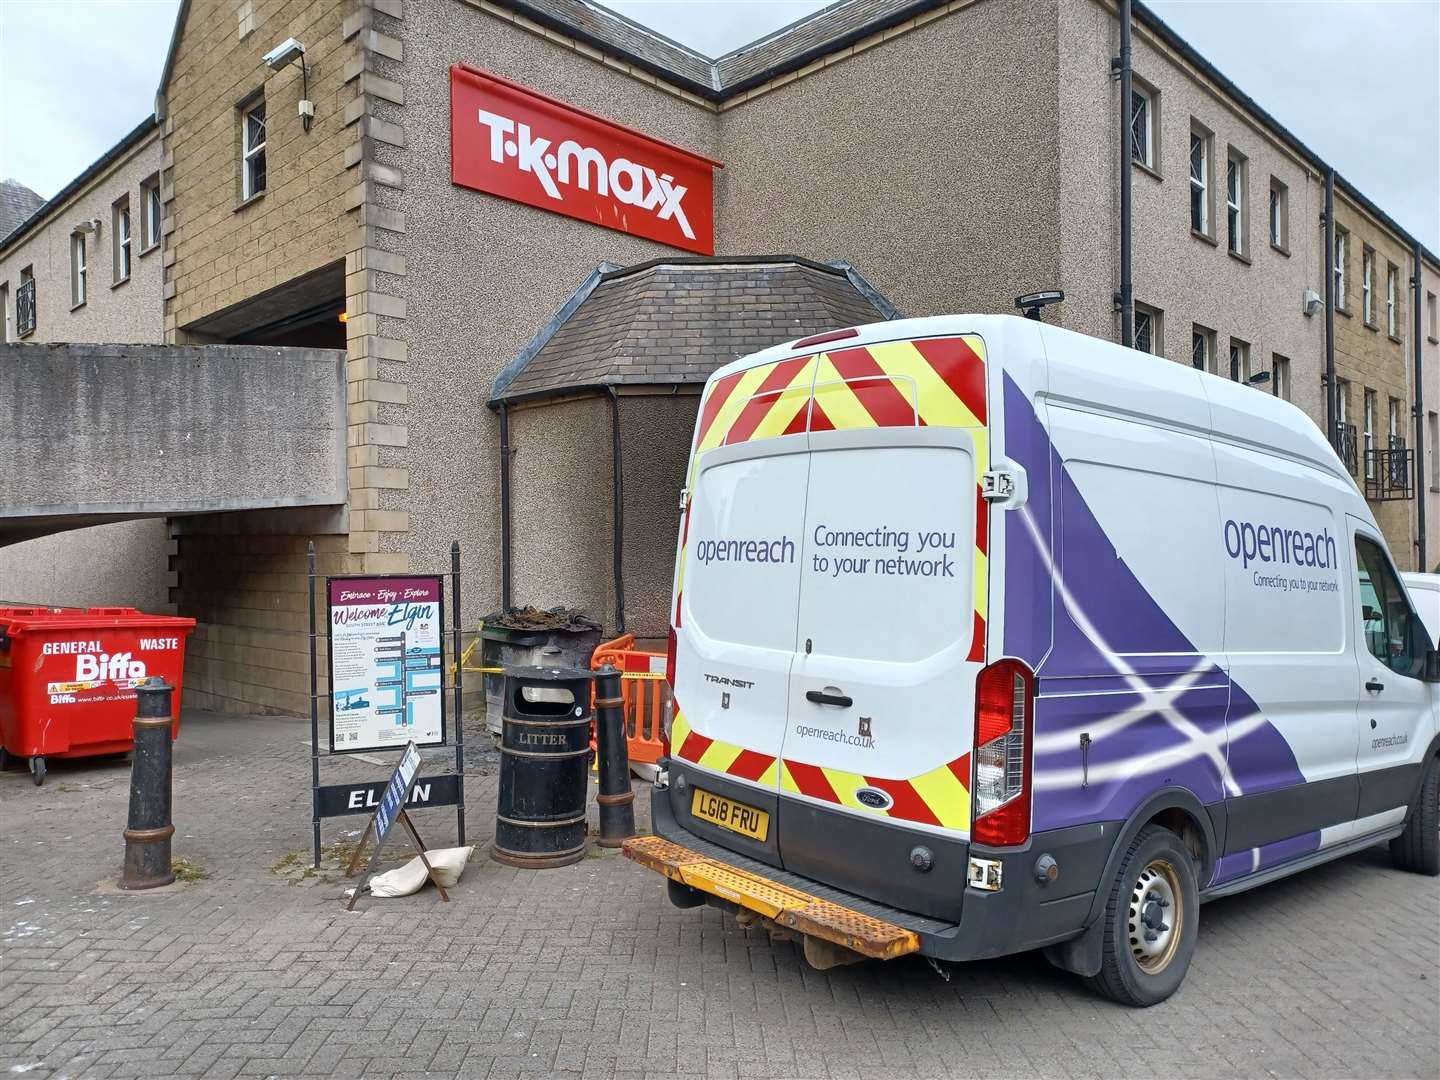 Openreach turned up around midday on Monday to assess the extent of the issue.